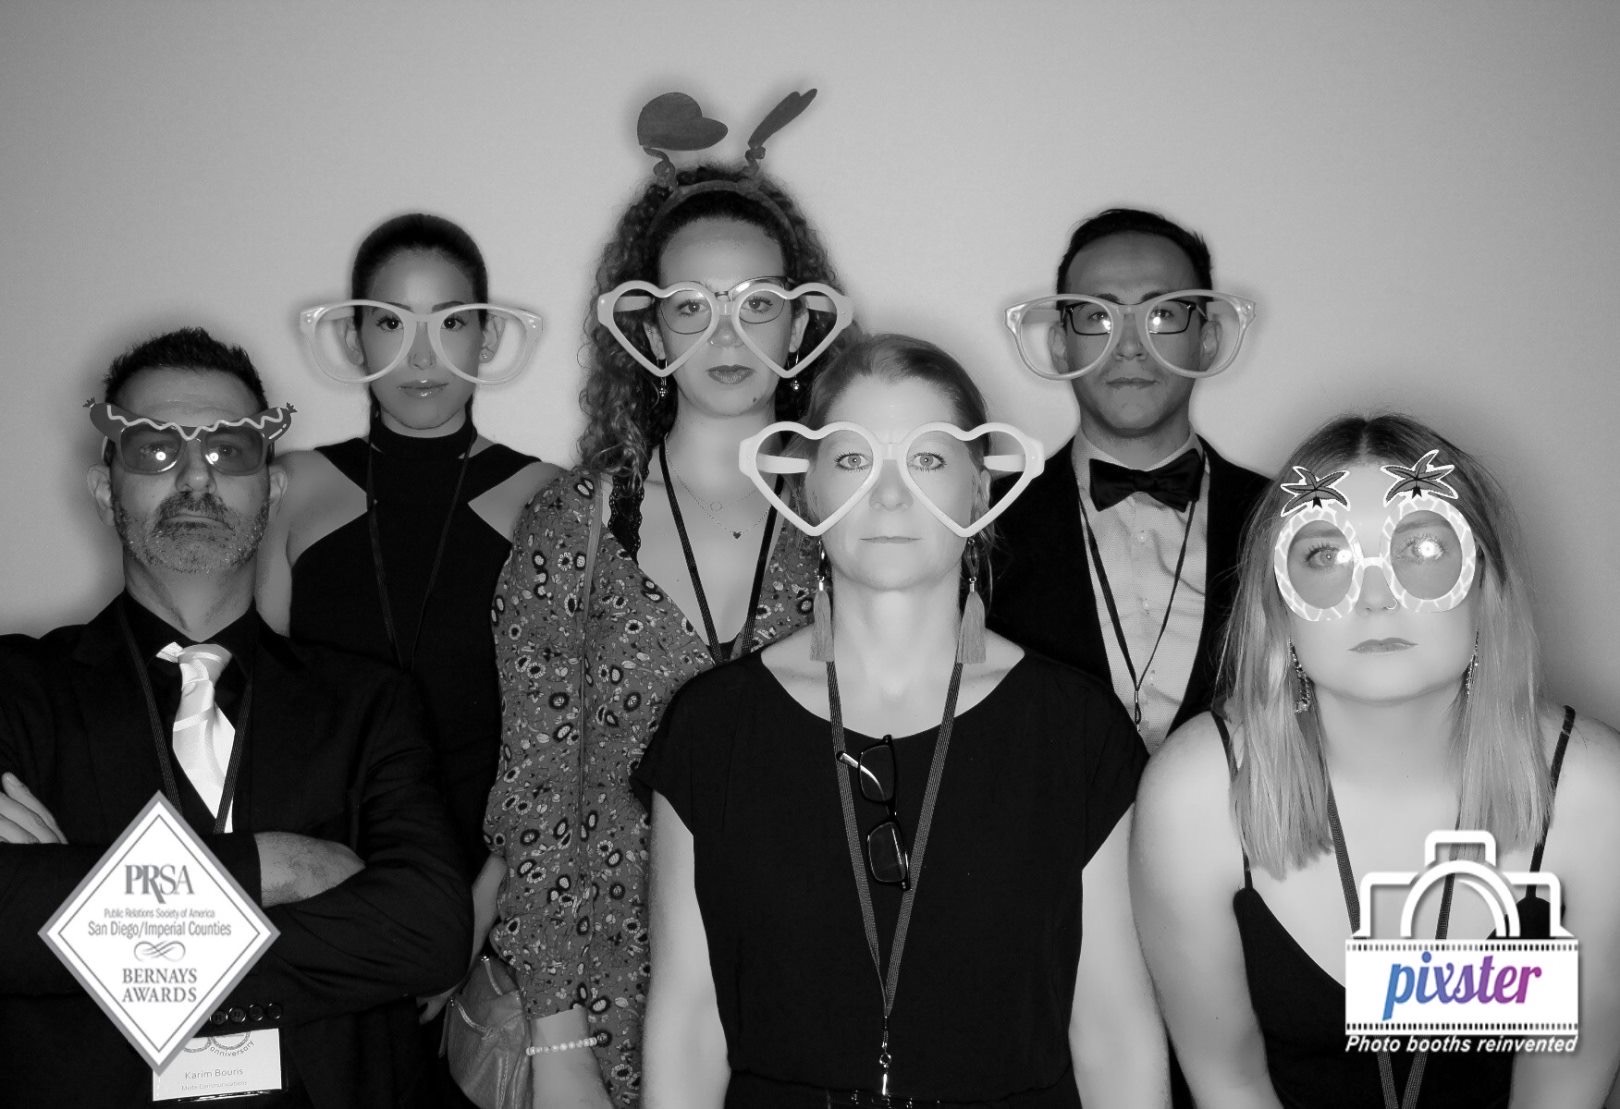 Mixte team wearing silly glasses with serious faces